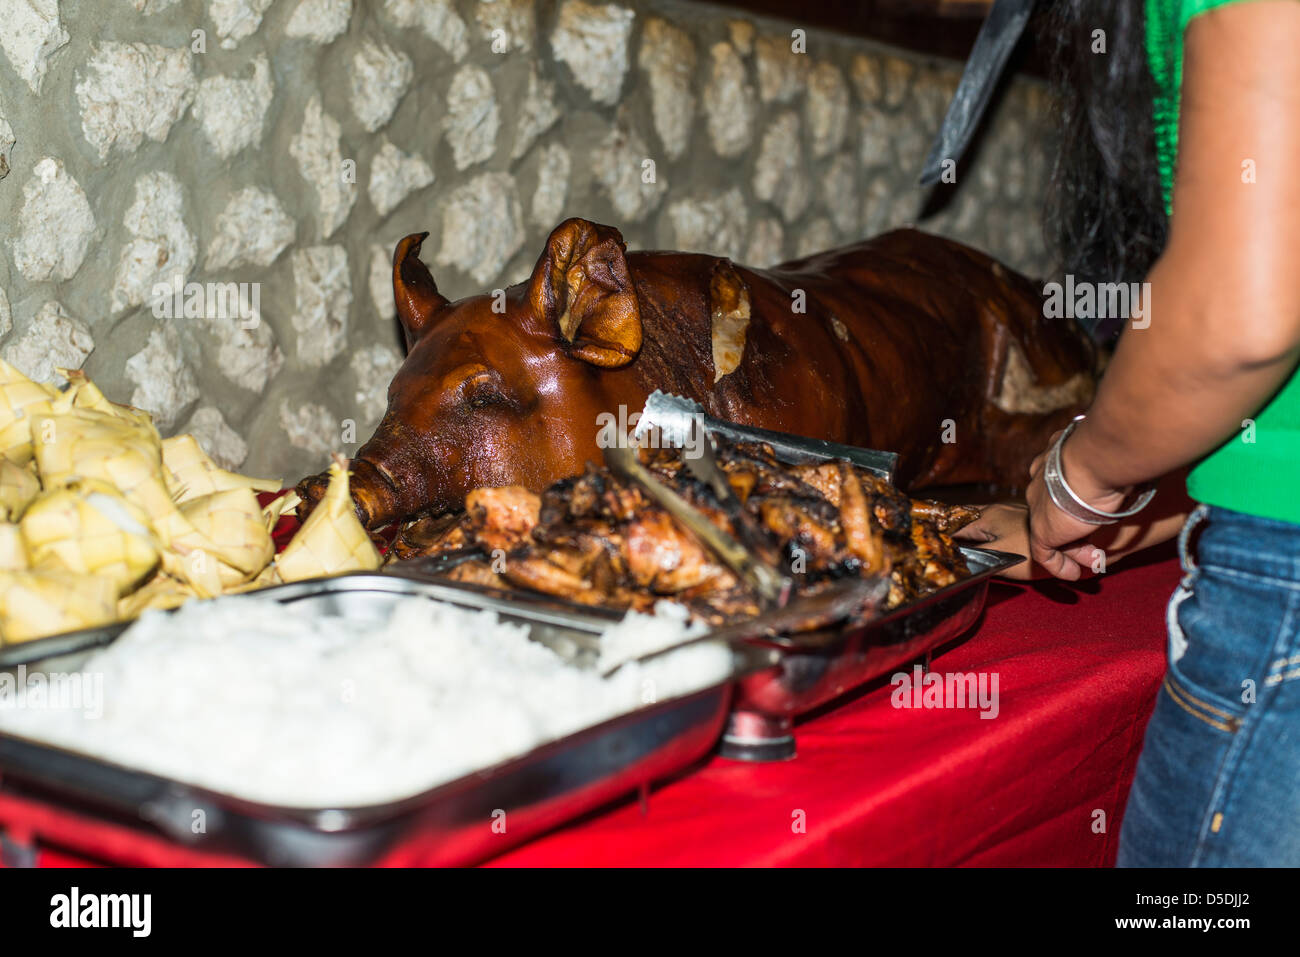 Christmas dinner with a whole roasted pig Stock Photo